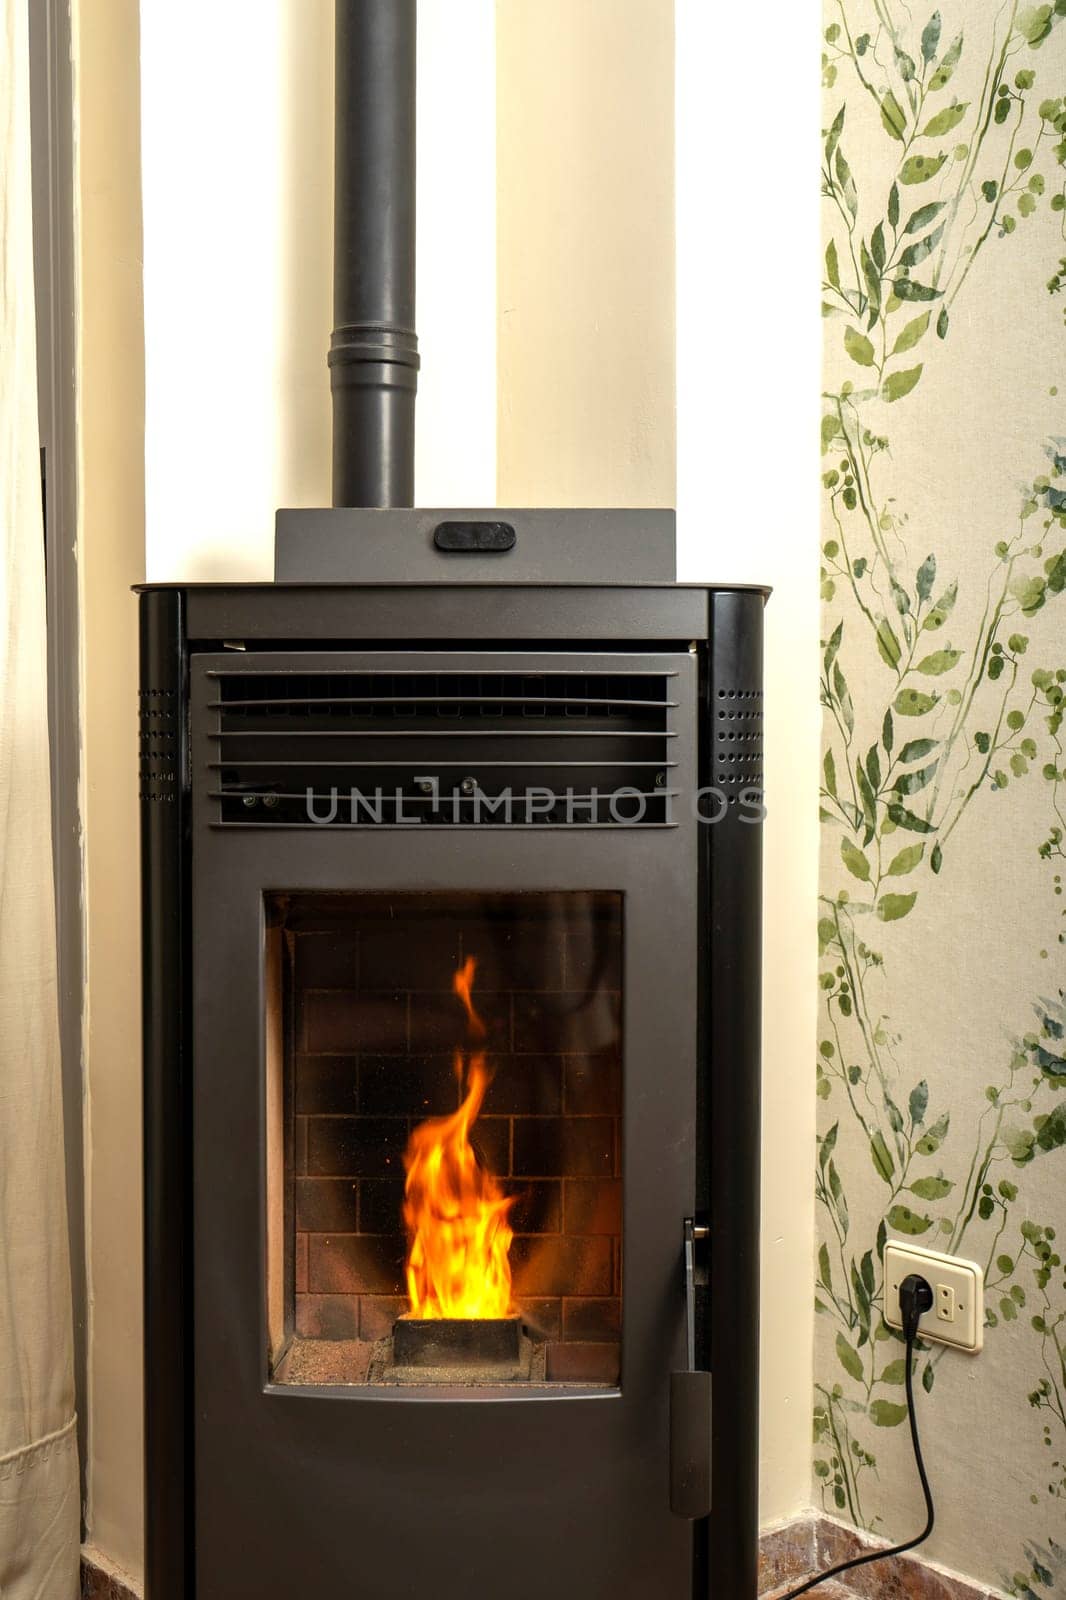 Vertical image of a pellet stove with a beautiful flame inside a living room of a house. Renewable energy source. Biomass in pellet form. Green energy. by Barriolo82